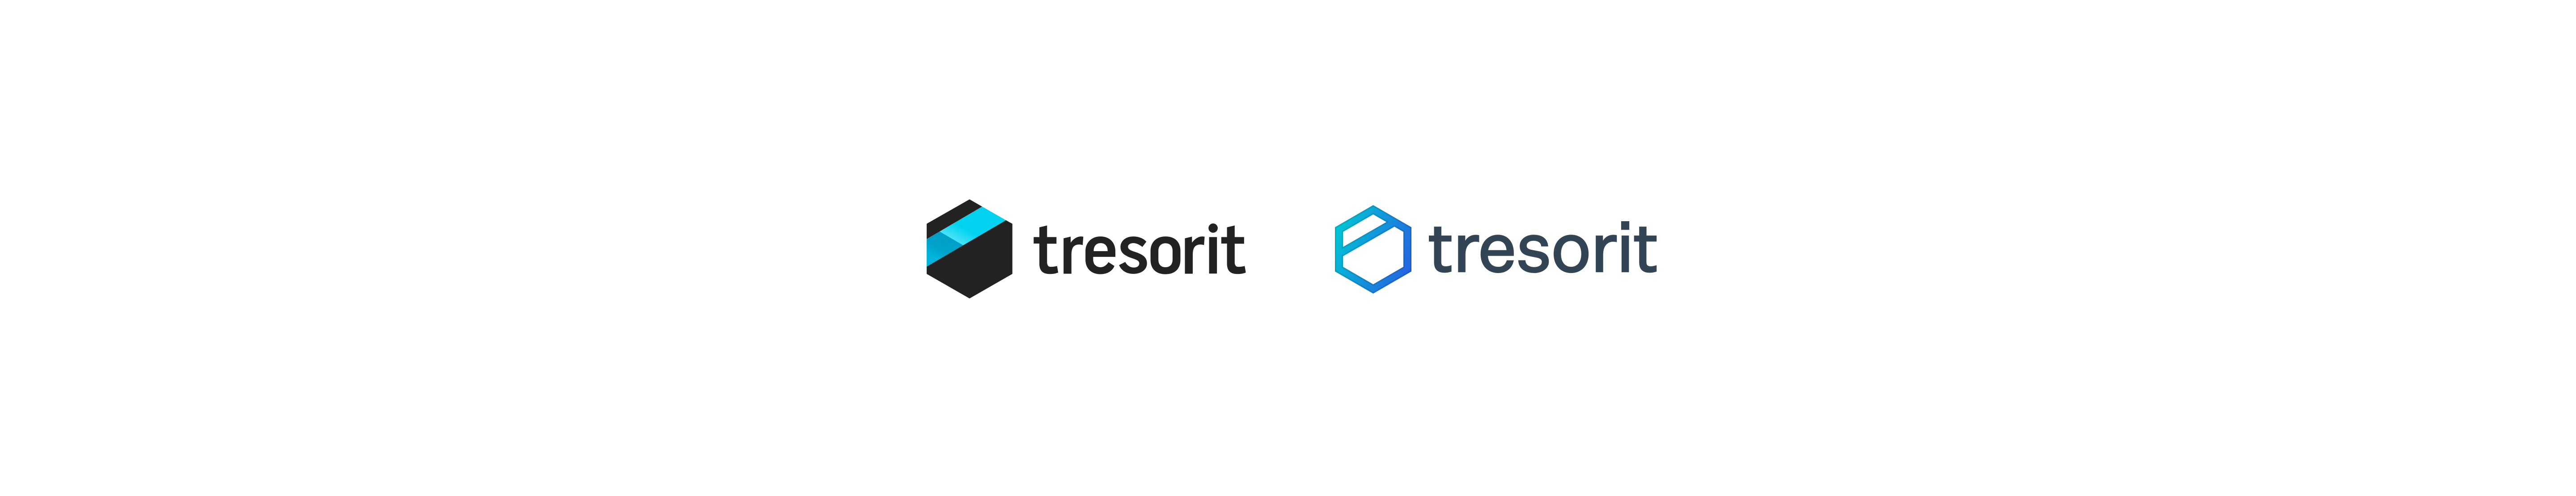 Meet our new visual identity, an even more intuitive and cleaner Tresorit